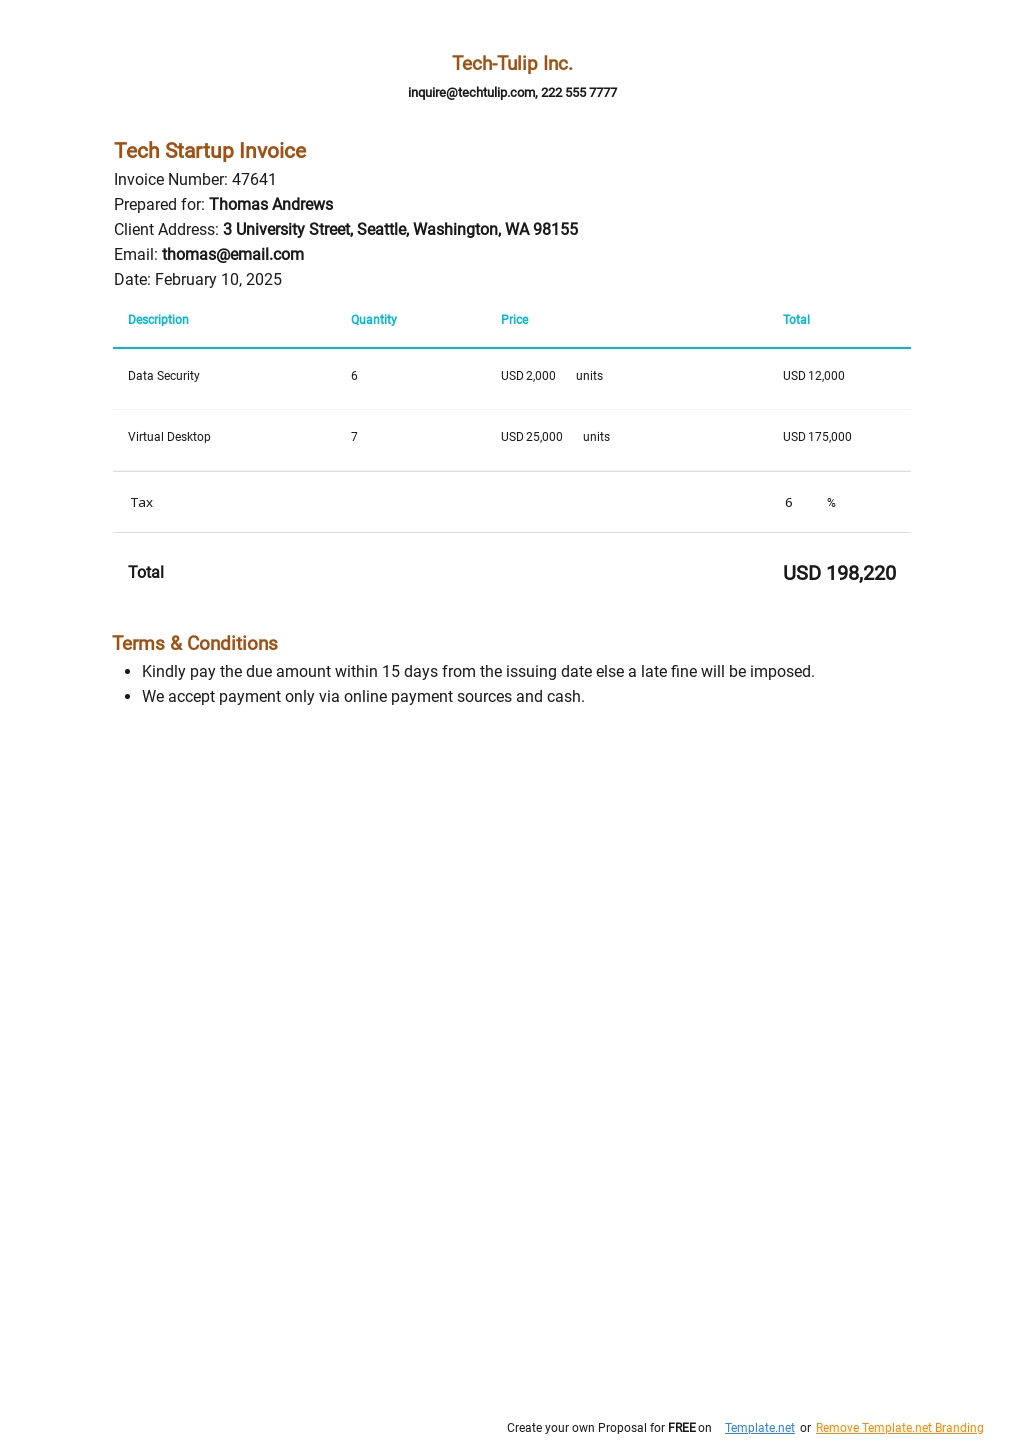 Tech Startup Invoice Template in Google Sheets, Excel, Word